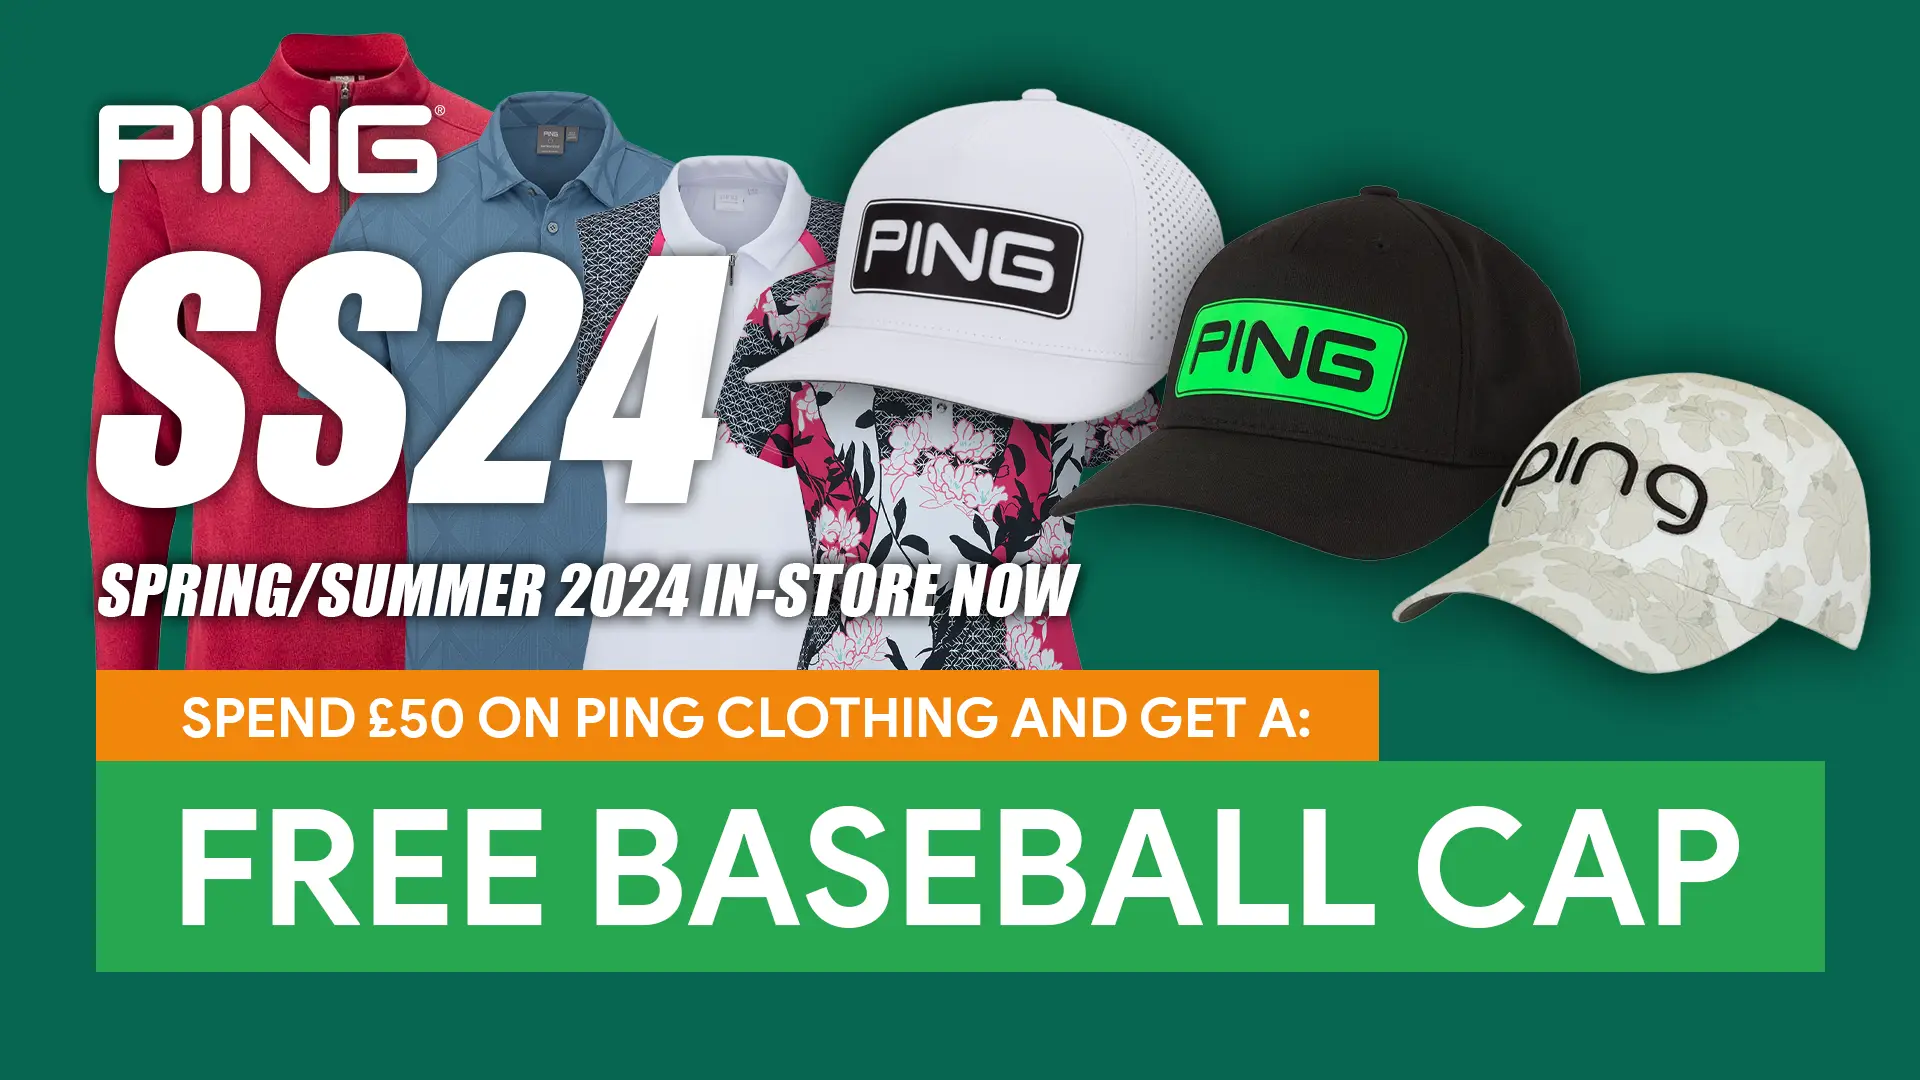 Free Ping baseball cap when you spend £50 on Ping clothing